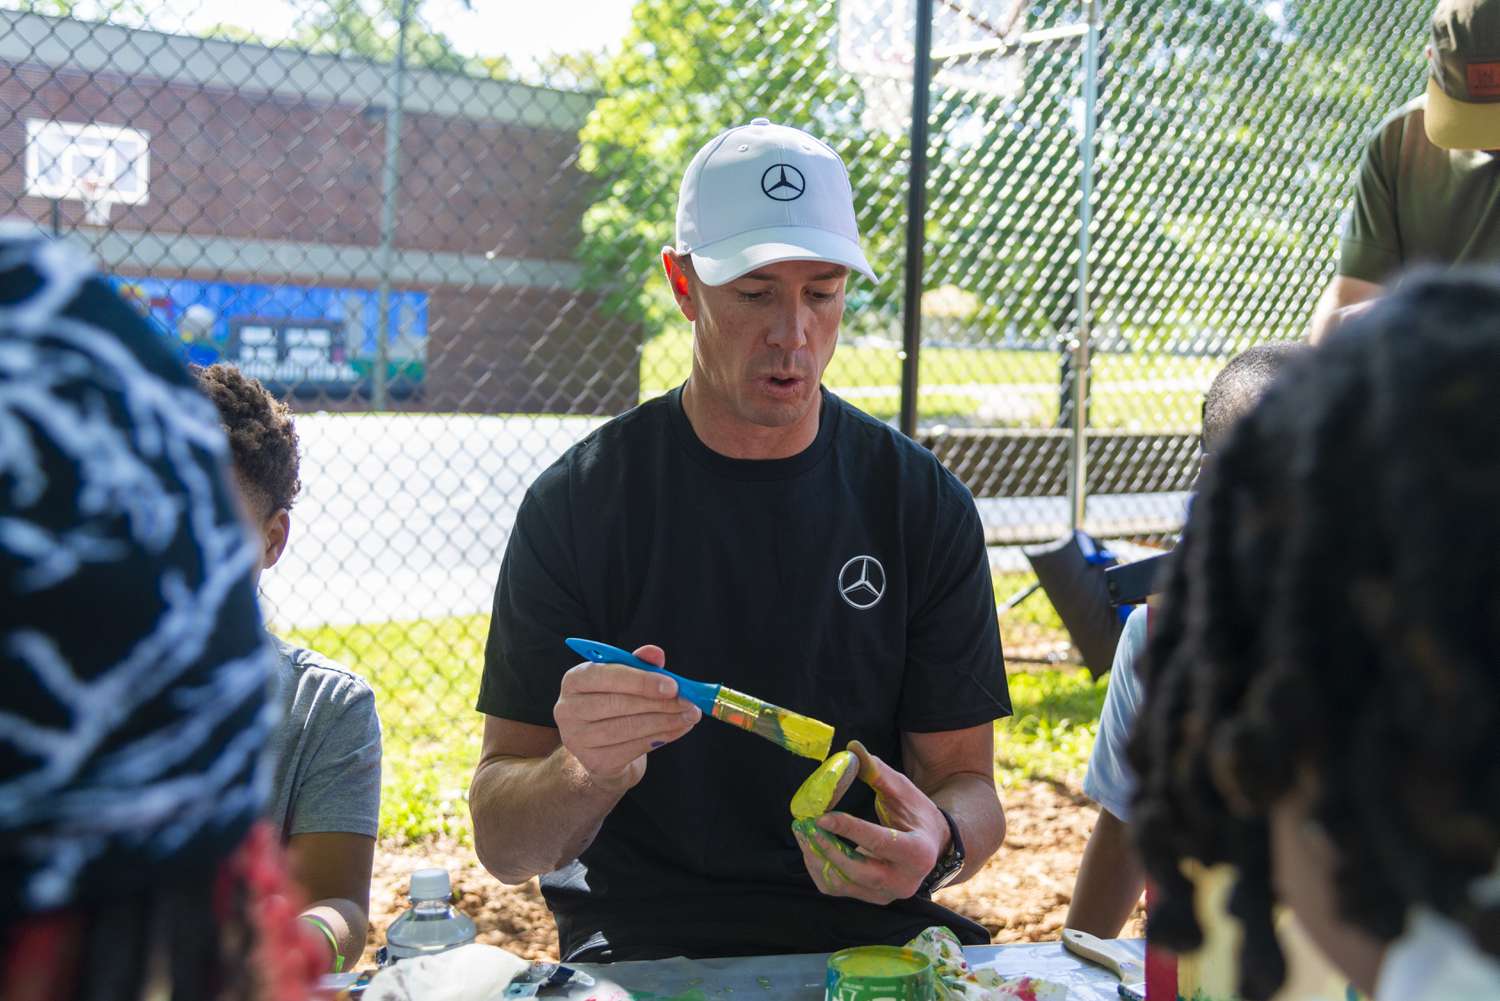 Former NFL Star Matt Ryan Kicks Off Car Safety Campaign With New 'Clifford' Book (EXCLUSIVE)